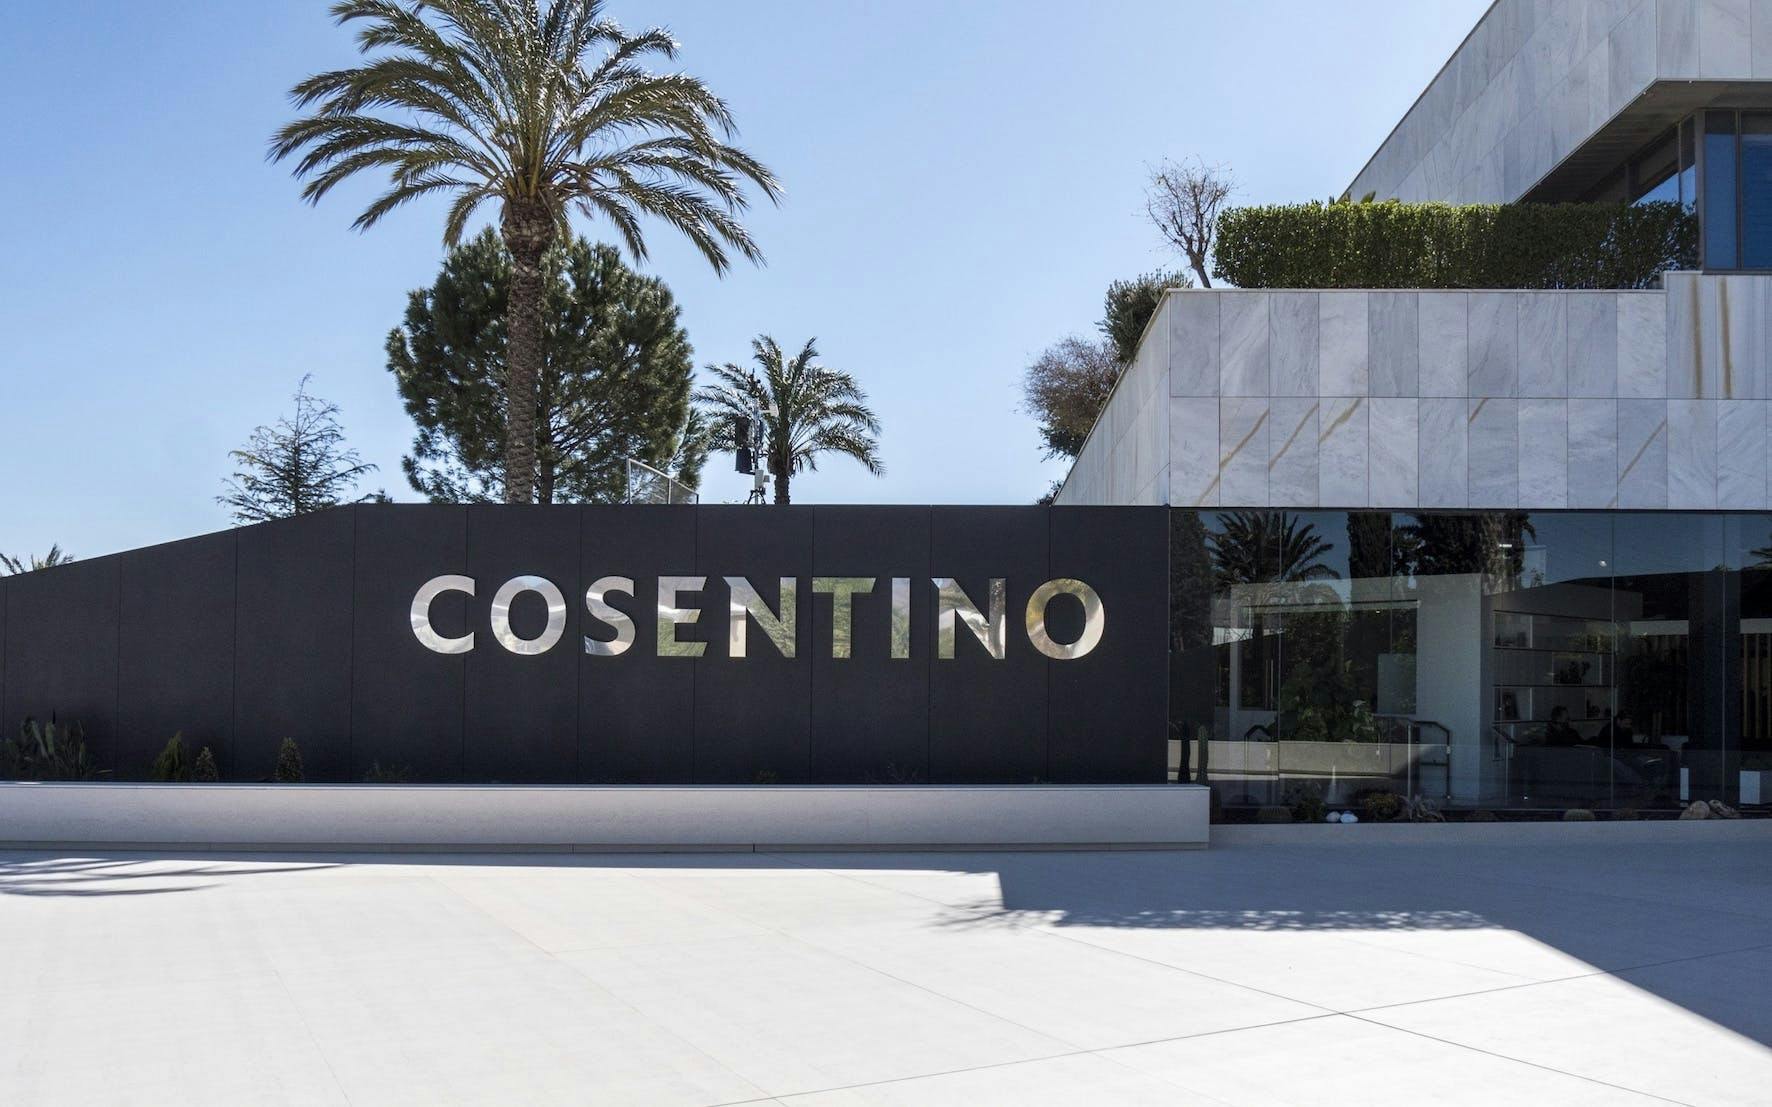 Image 33 of Entrada HQ Cosentino 3 4 in Cosentino Group restructures its Marketing and Comms area - Cosentino